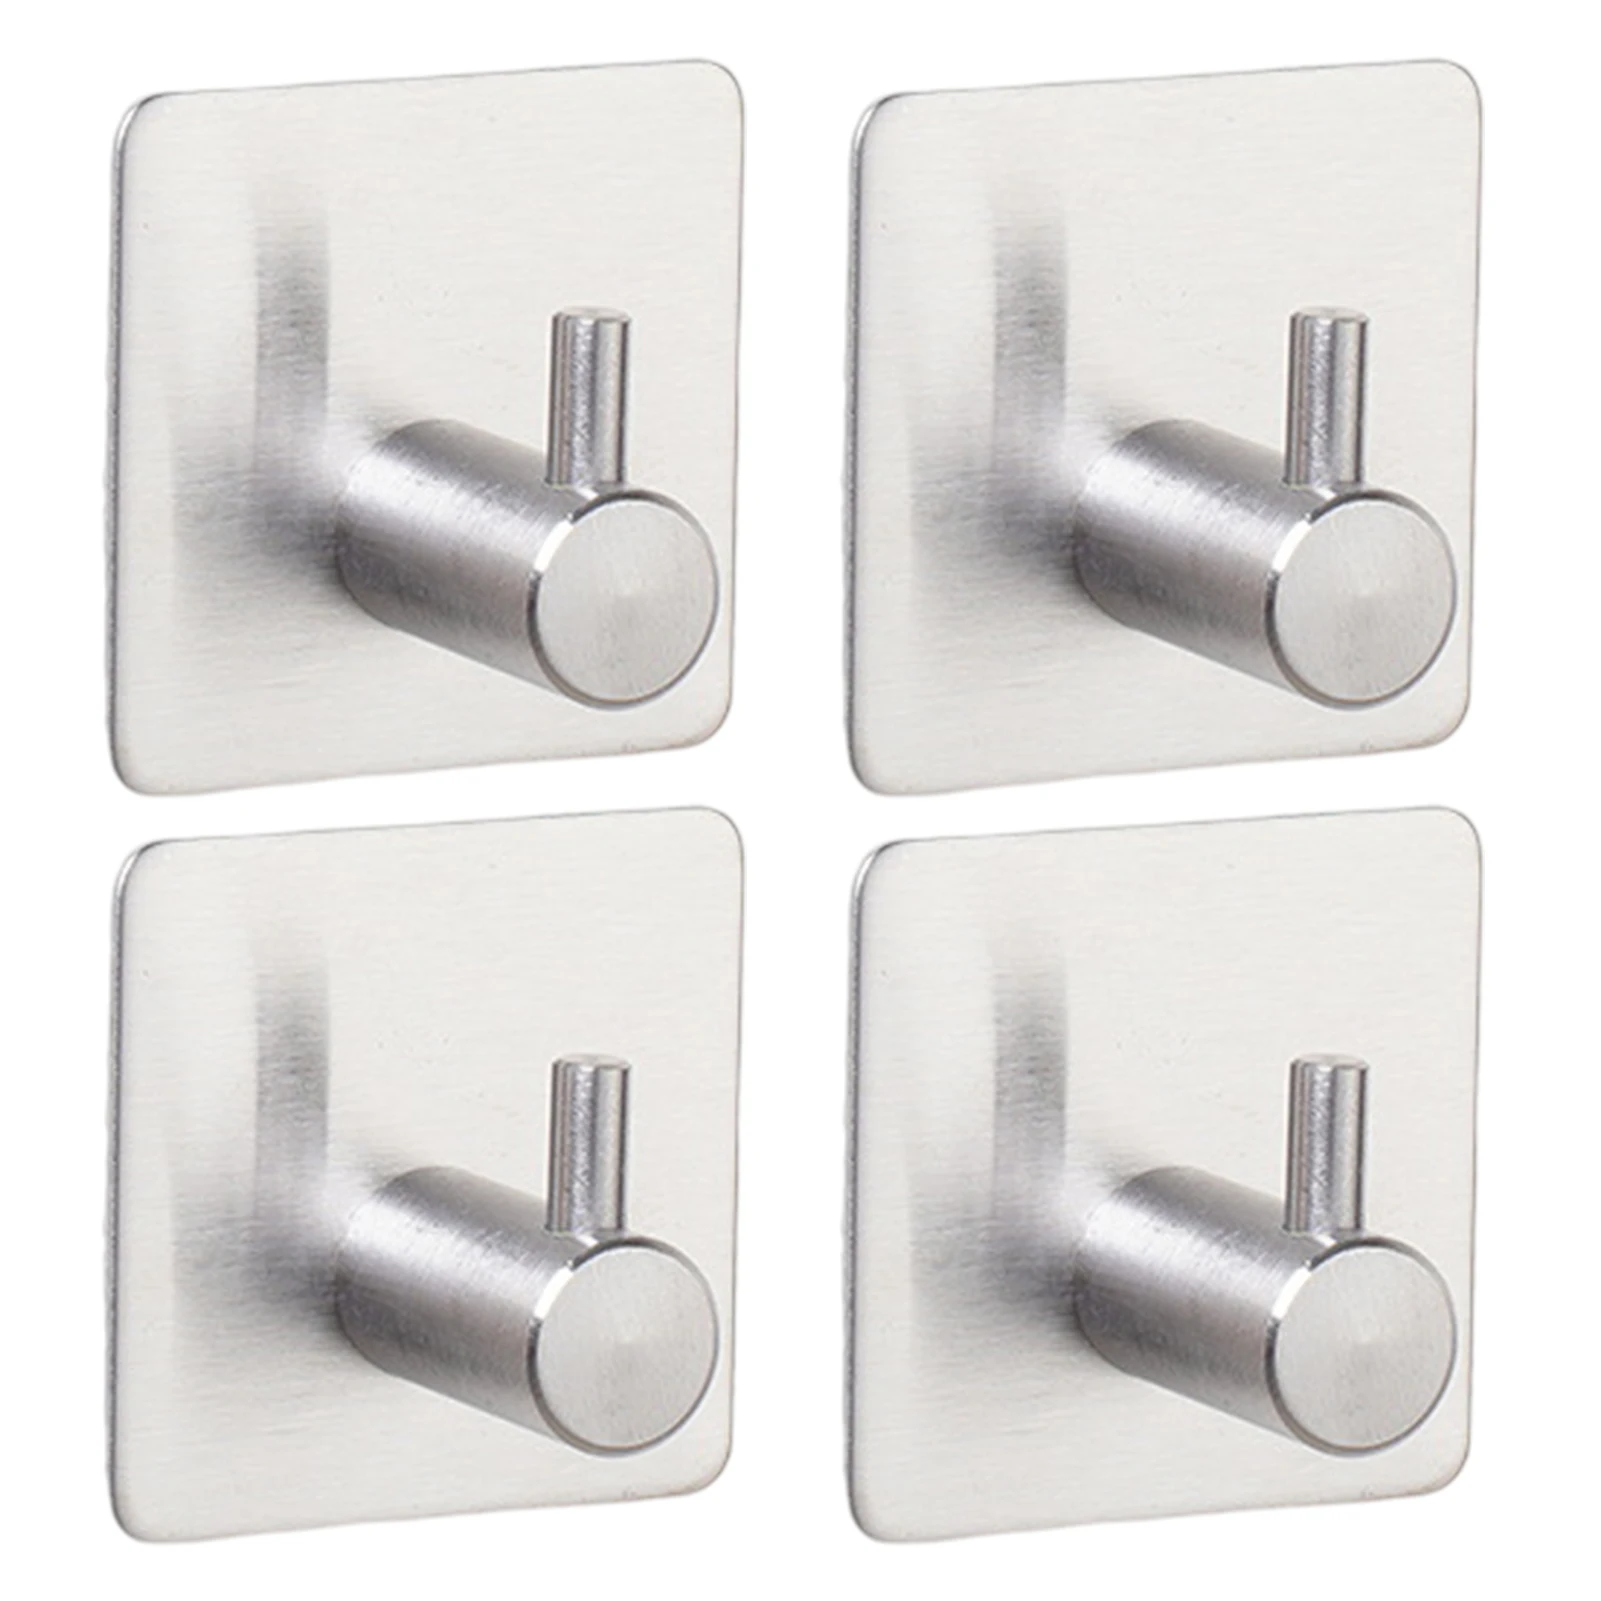 

4pcs Hanging Robe Towel Hook Washroom Round Shape Heavy Duty Adhensive Hotel Kitchen Durable For Bathroom Clothes Wall Mounted